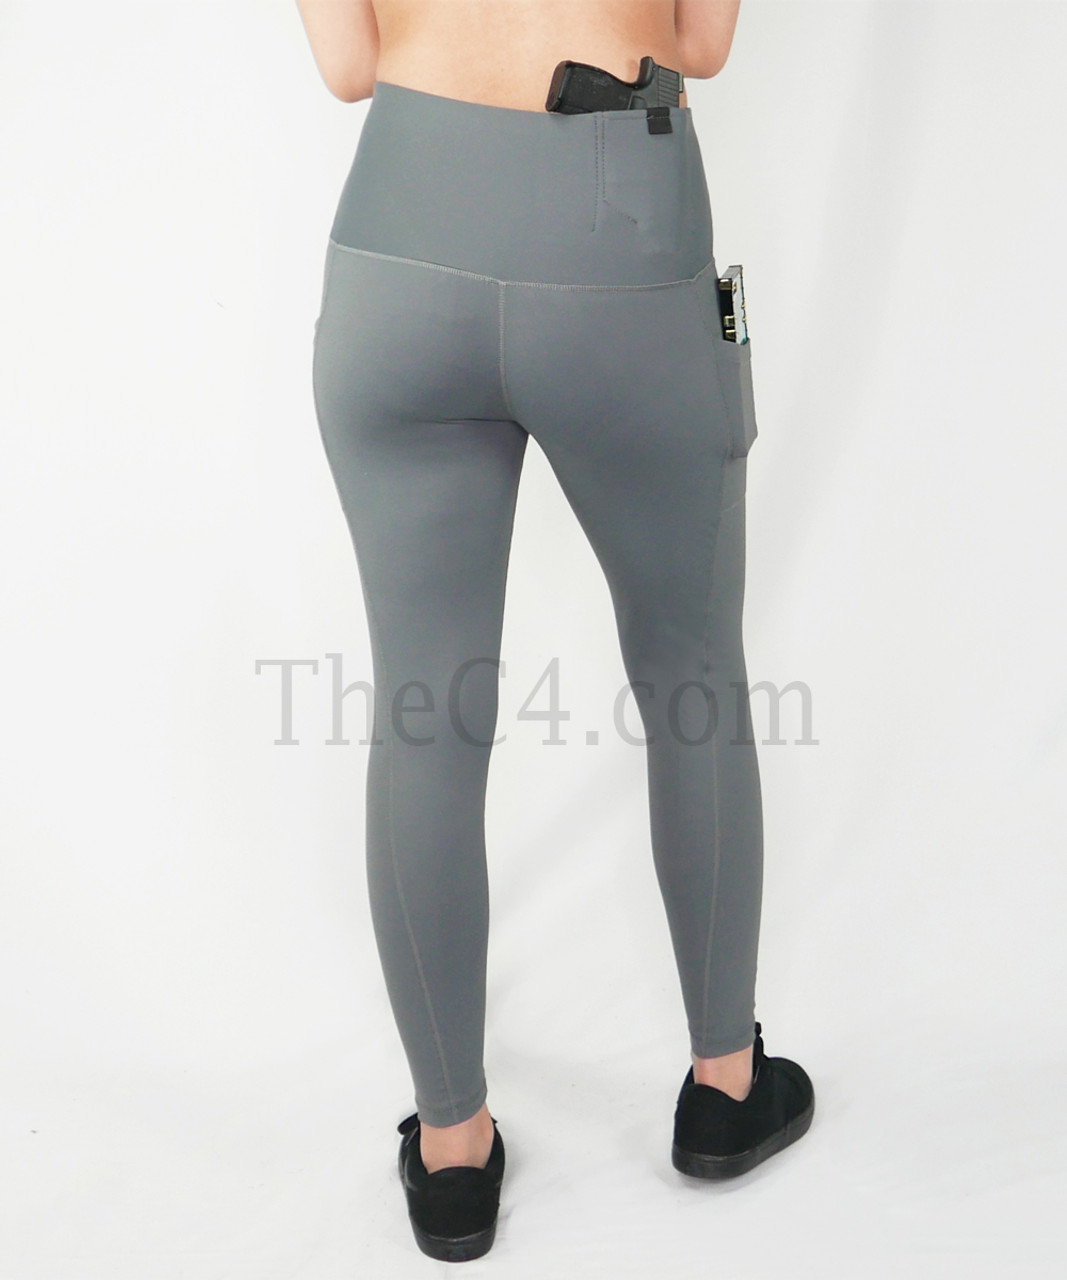 Fit4fia - Concealed Carry ✖️ Leggings If you are wondering how to  efficiently and safely conceal carry in leggings this post is for you✔️  @alexo offers a range of concealed carry leggings